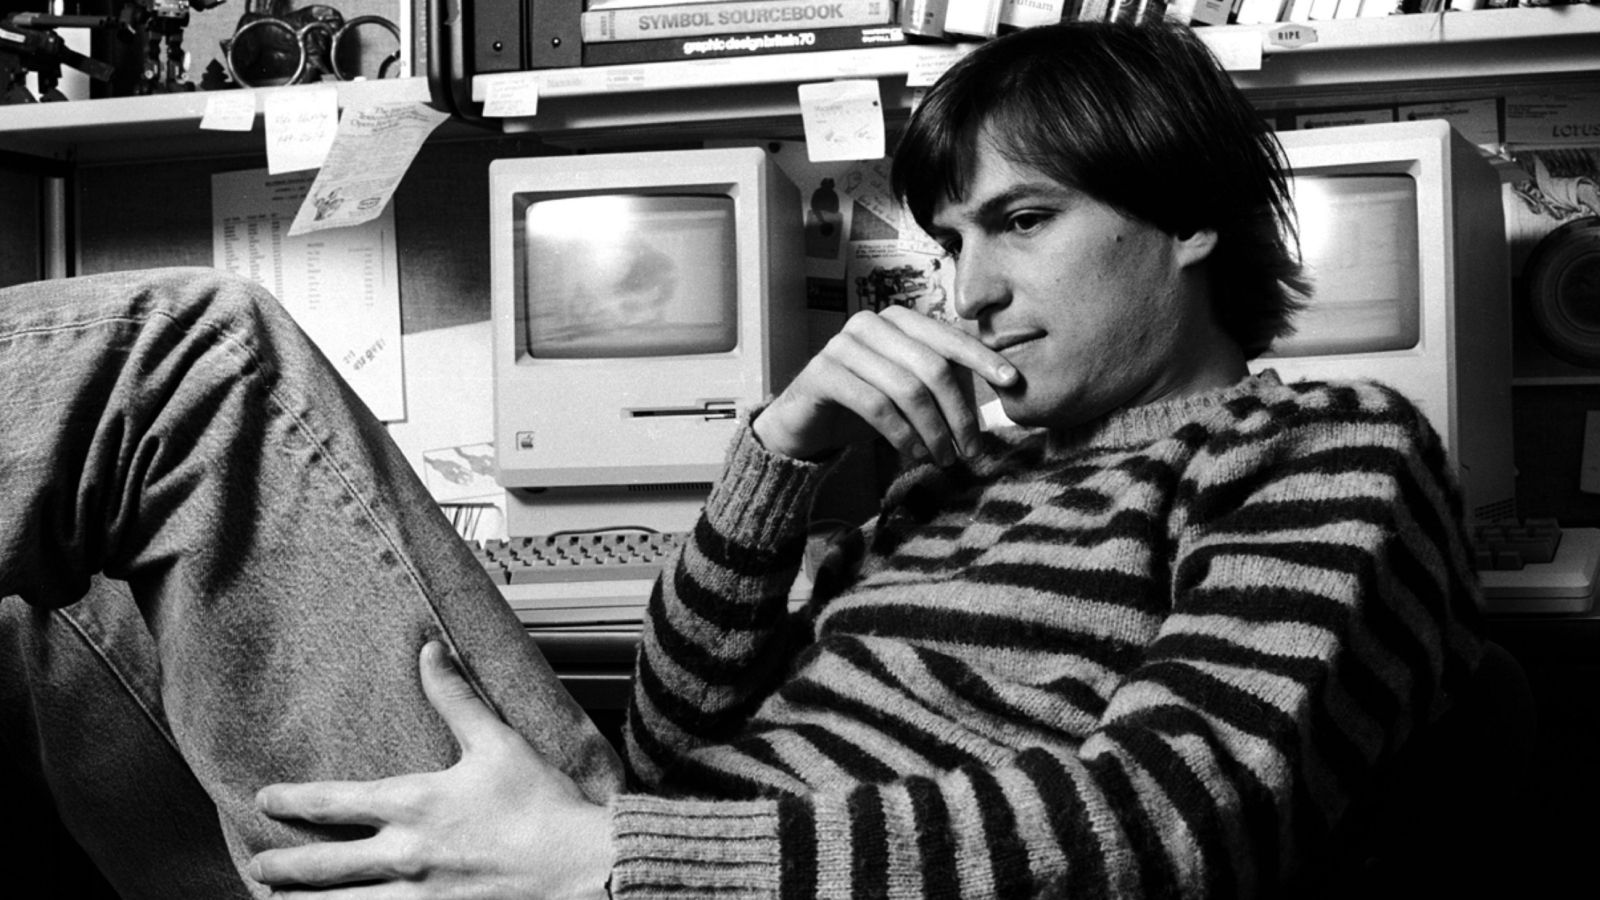 Watch Never-Before-Seen Footage of Steve Jobs Discussing the Future of Computers in 1983